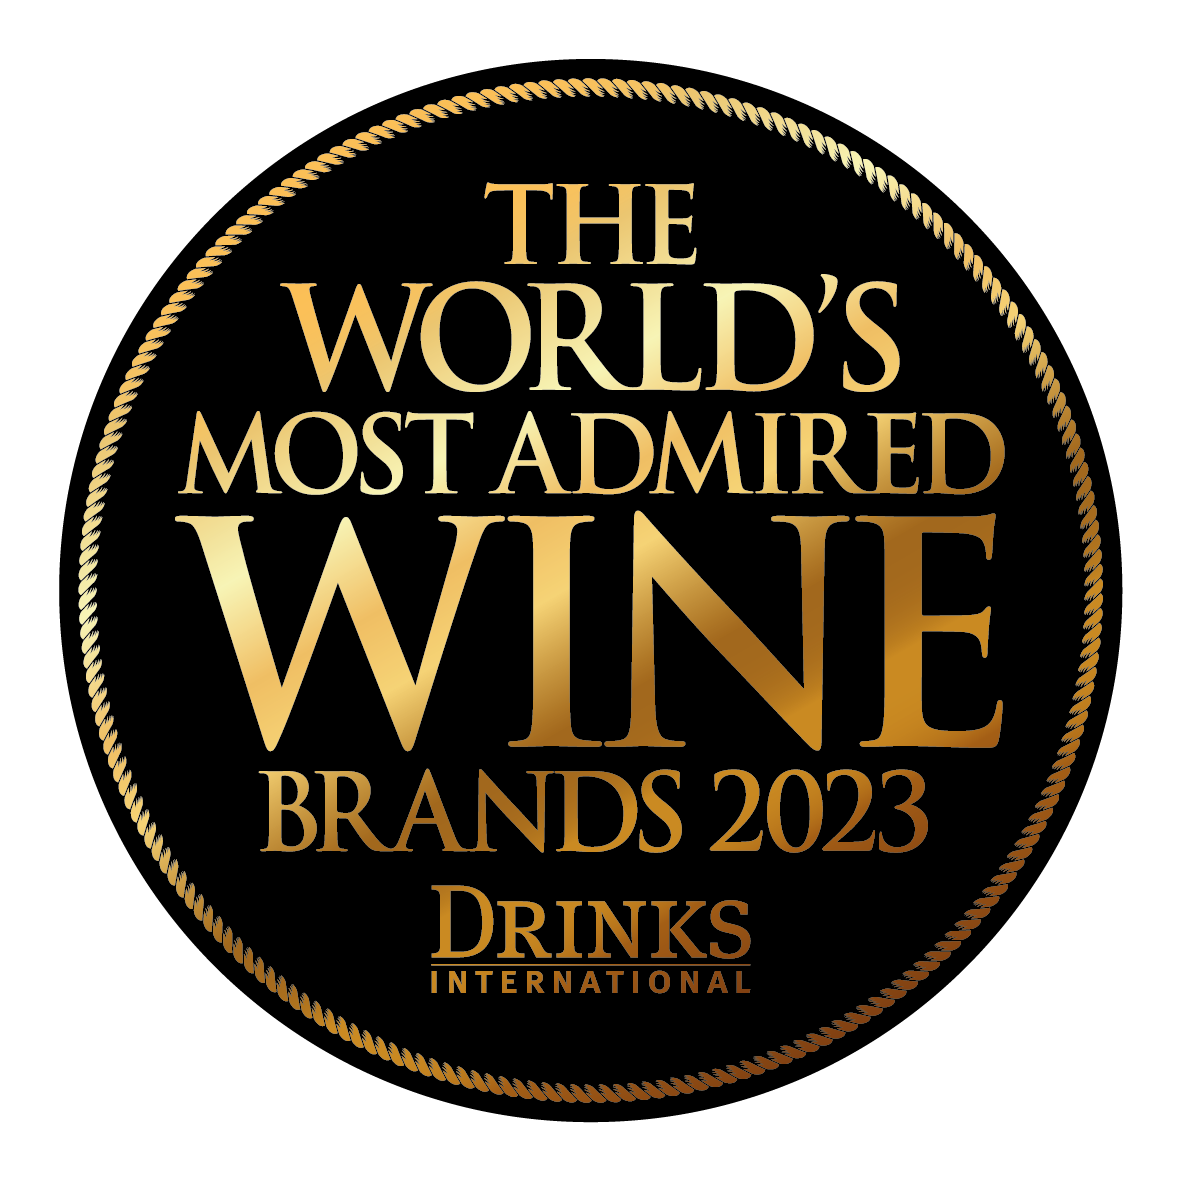 RAMÓN BILBAO ONCE AGAIN AMONG THE MOST ADMIRED WINE BRANDS IN THE WORLD